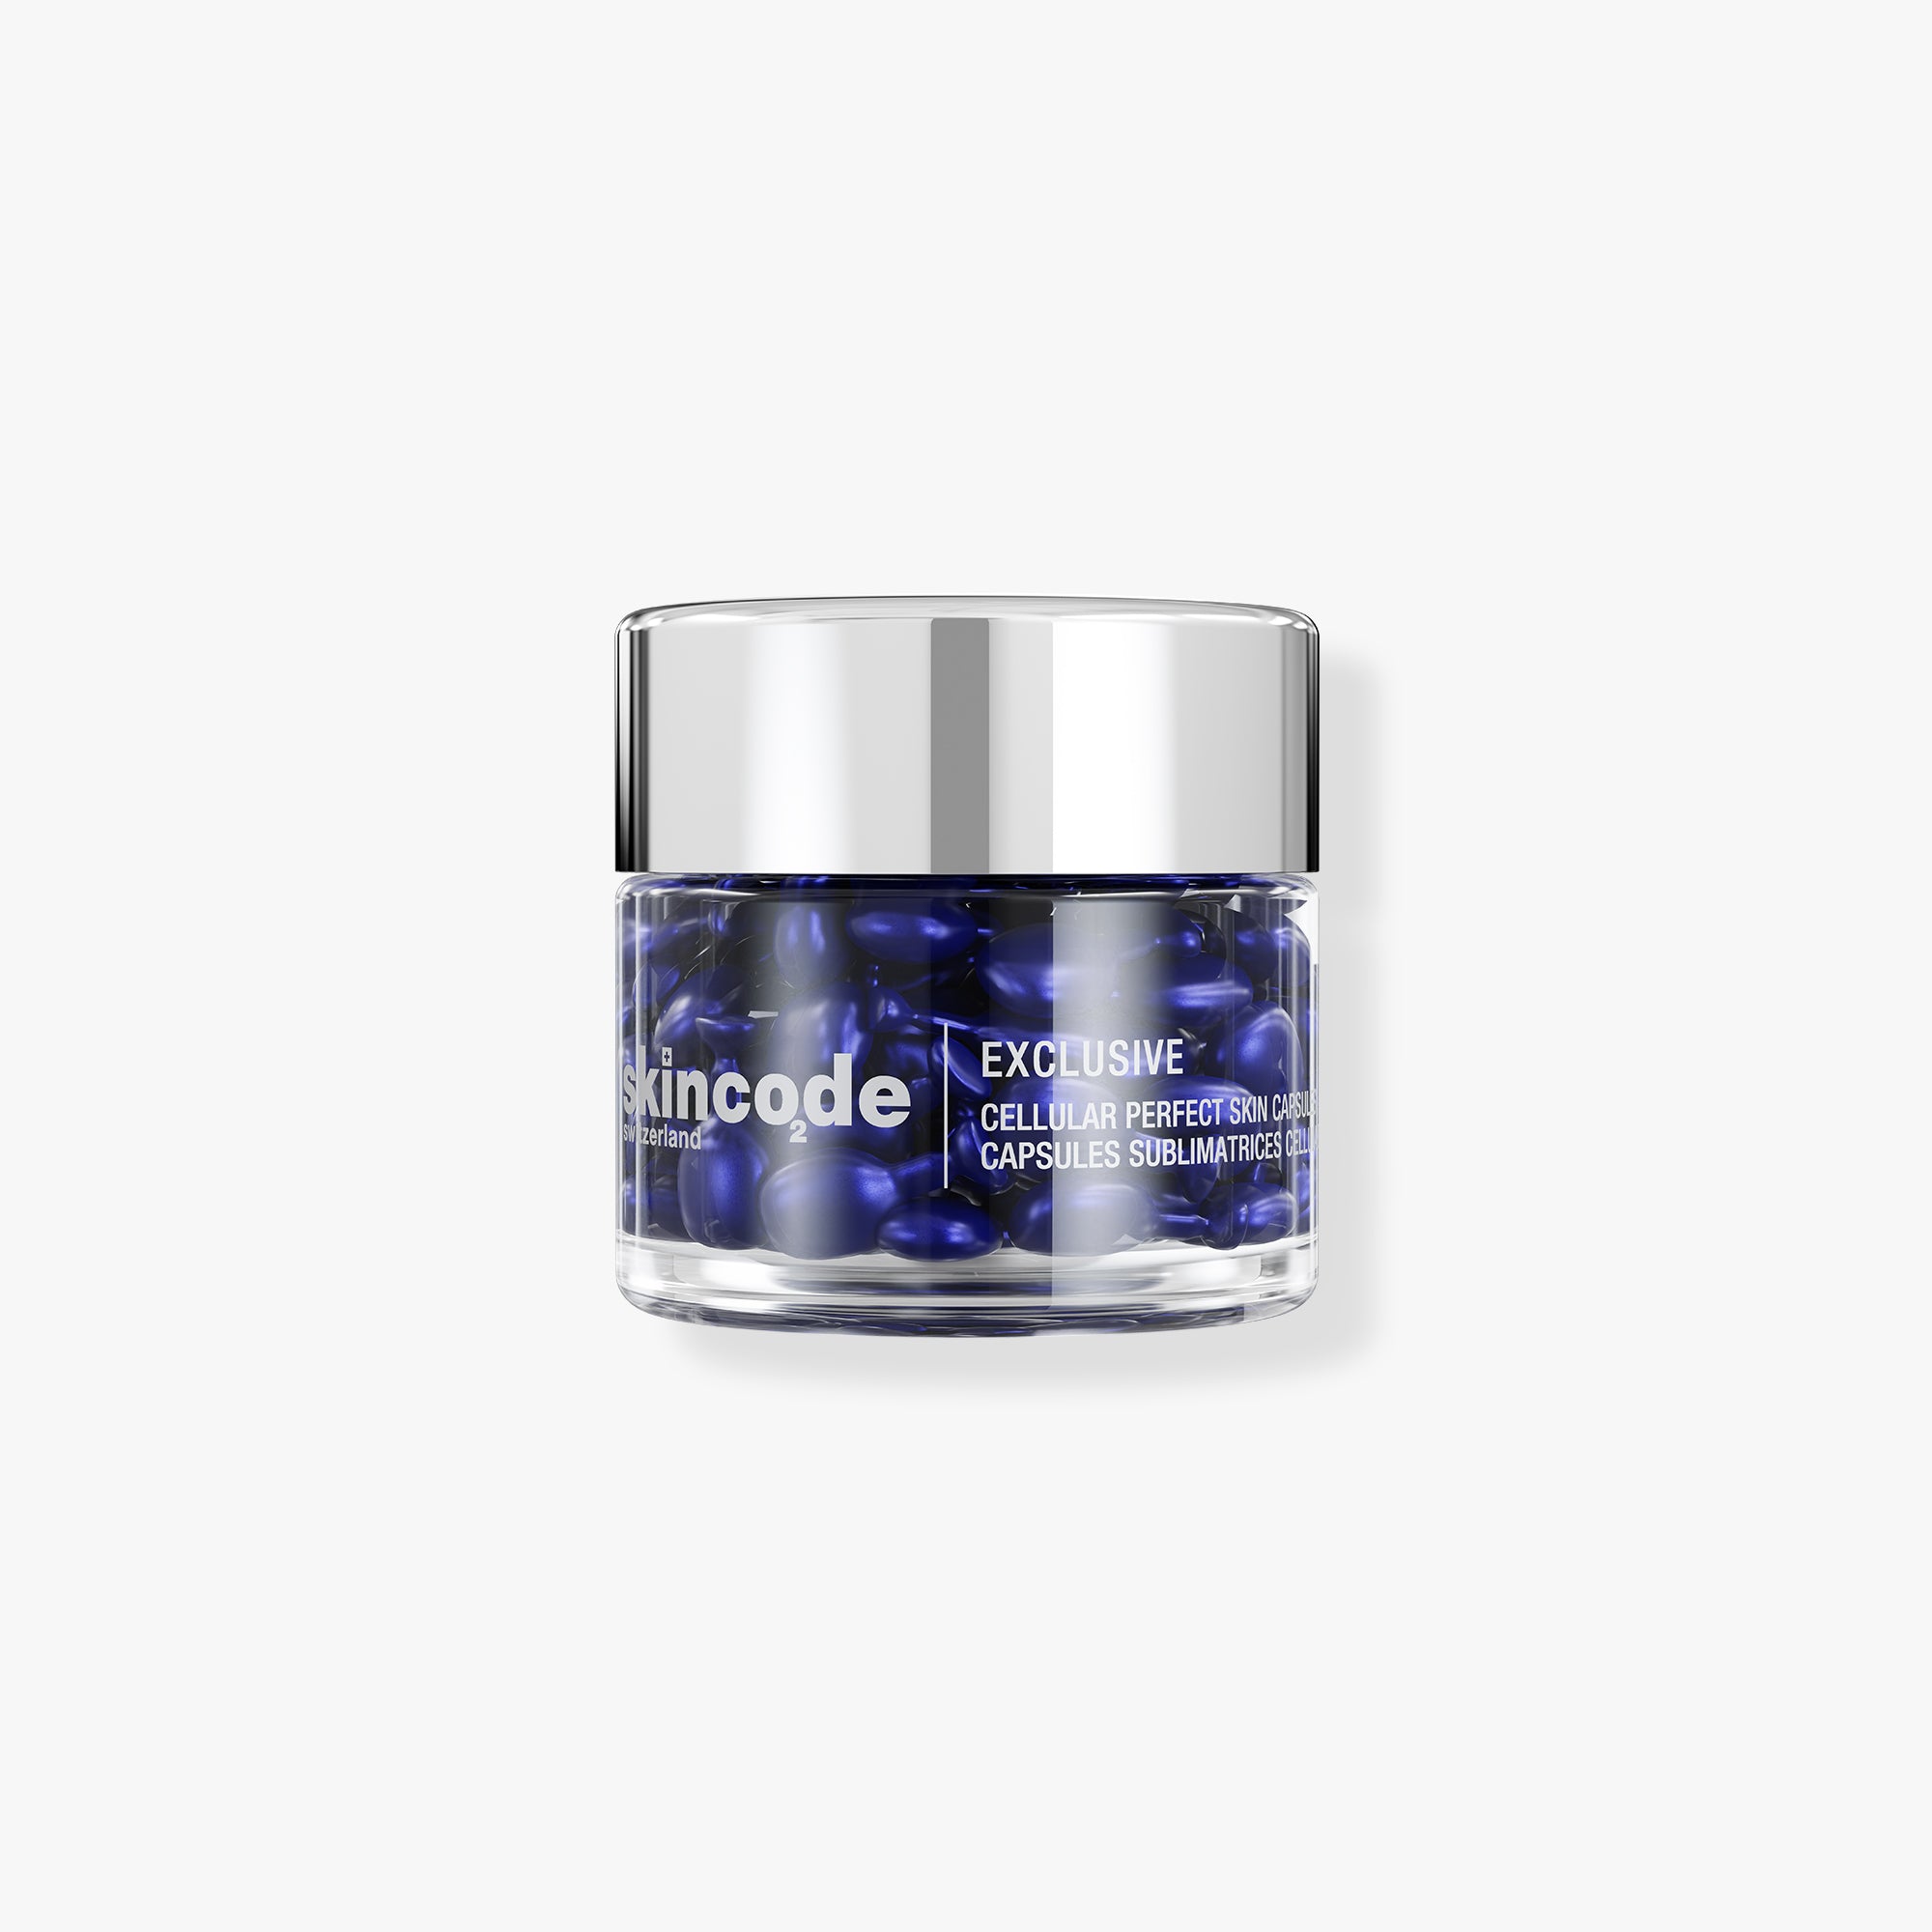 SkinCode Exclusive, Cellular Perfect Skin Capsules